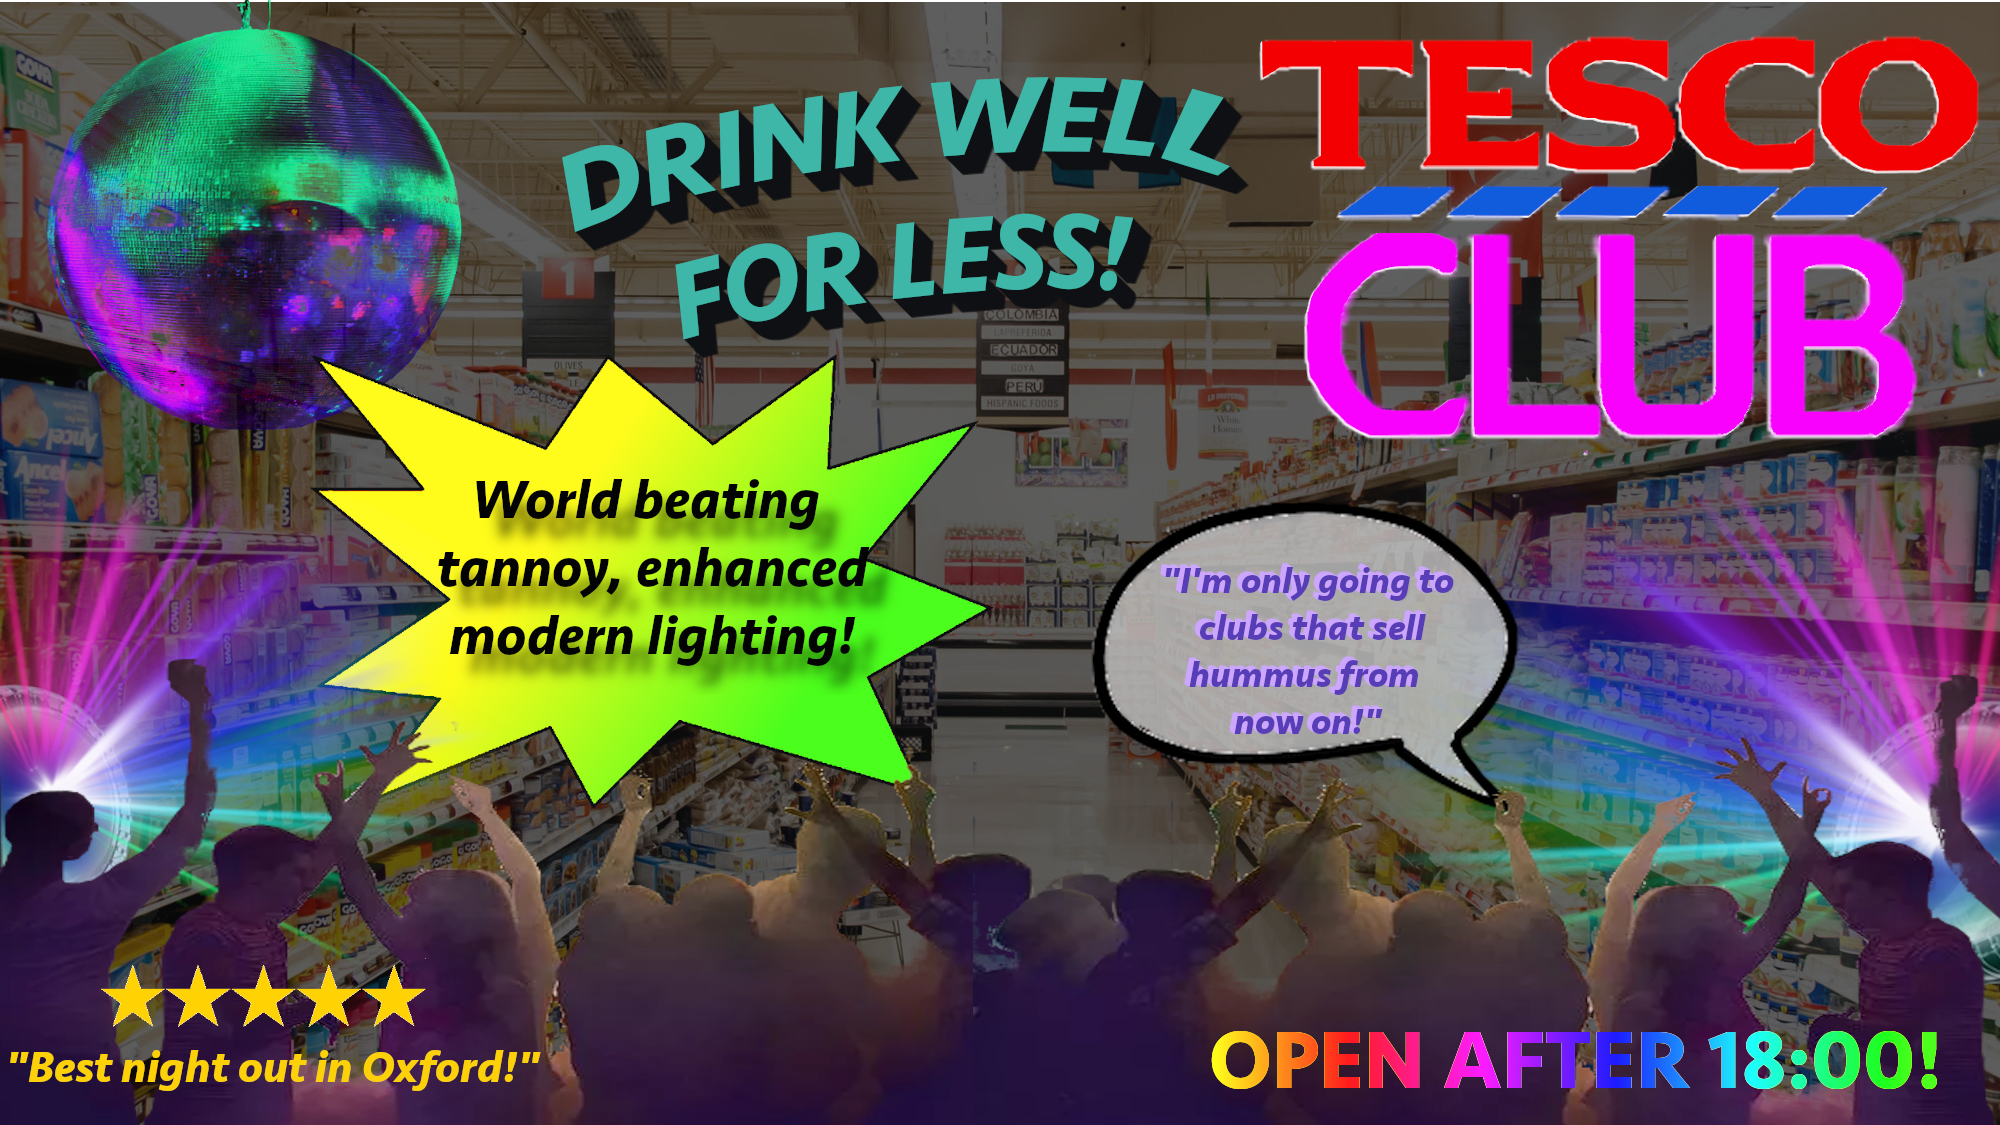 Advert: ‘Tesco club: drink well for less!’ Image is of a darkened supermarket with outlines of dancing
                people and bright strobe lighting over the top. Captions read ‘World-beating tannoy, enhanced
                modern lighting!’, ‘I’m only going to clubs that sell hummus from now on!’, ‘Best night out in
                Oxford!’, and ‘Open after 18:00!’